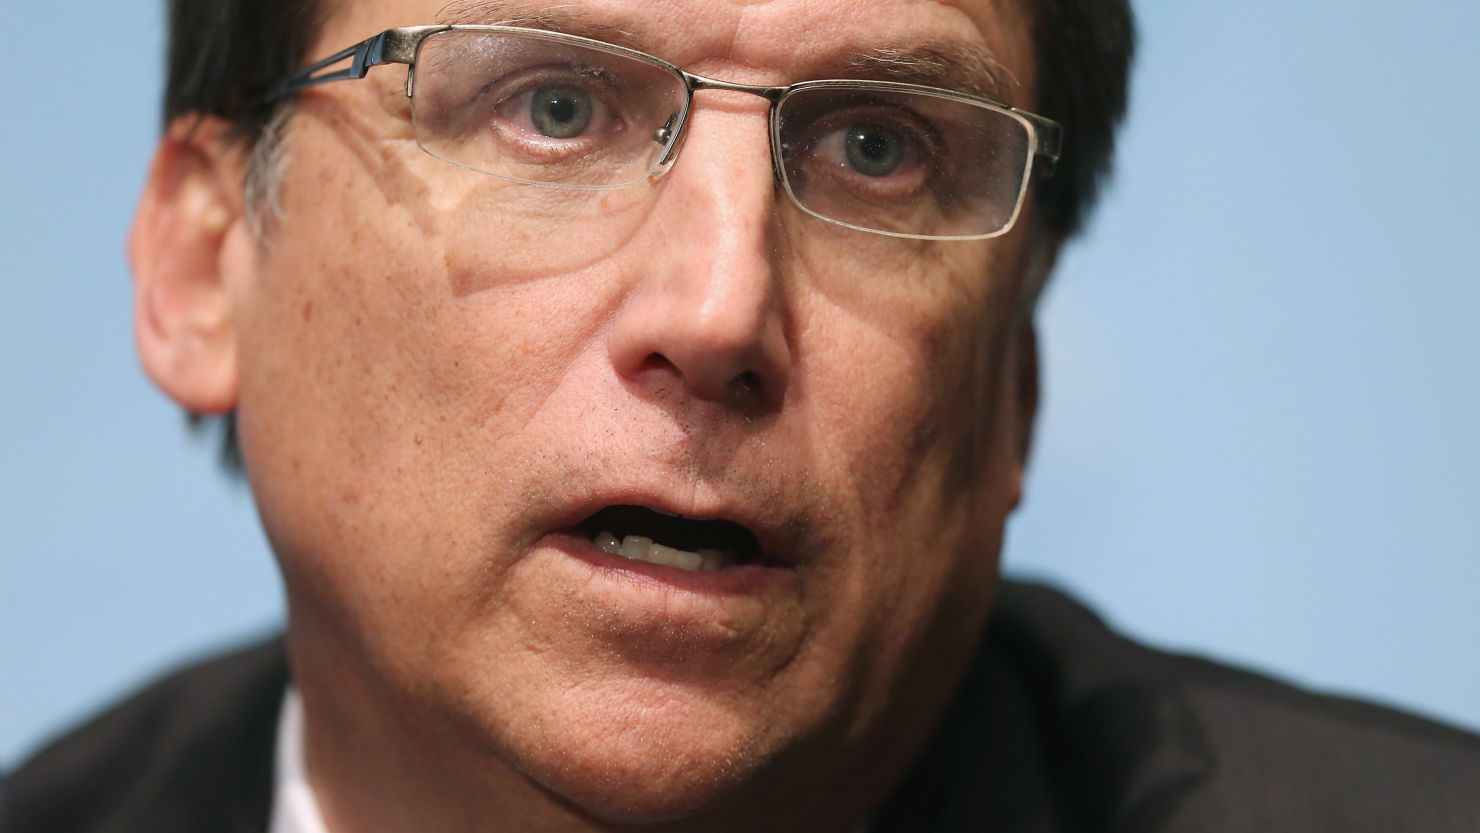 Then-North Carolina Gov. Pat McCrory holds a news conference with fellow members of the Republican Governors Association in February 2015 in Washington, DC.